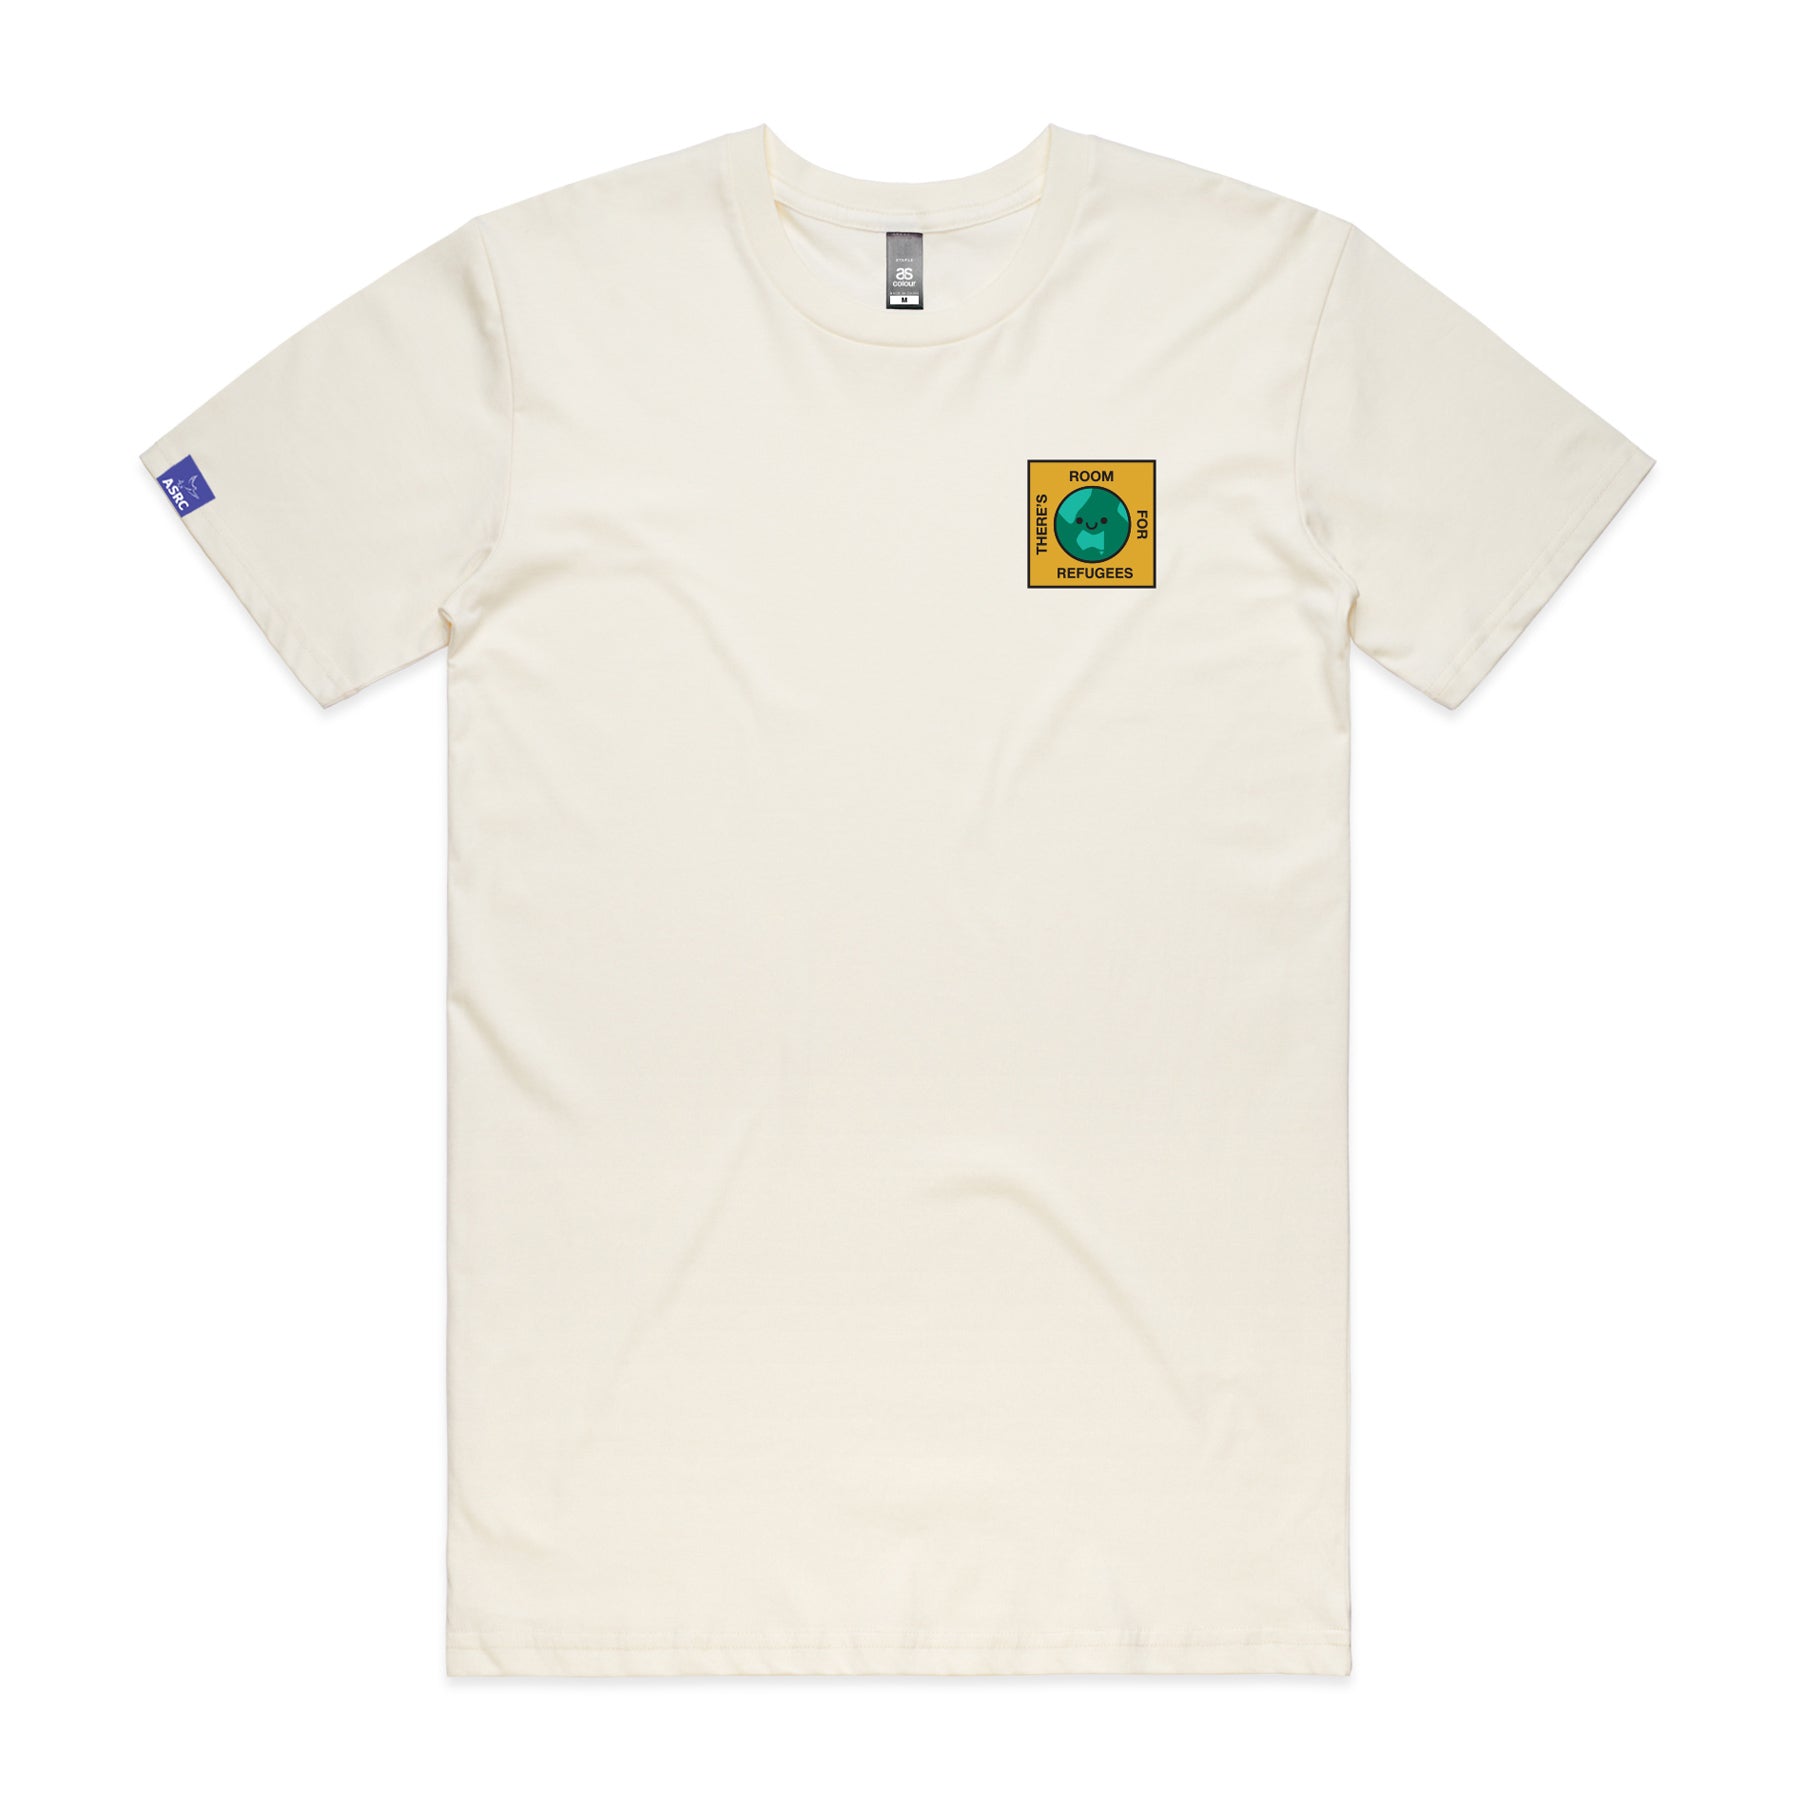 Beci Orpin x ASRC Welcome T-shirt - Mens (Natural)